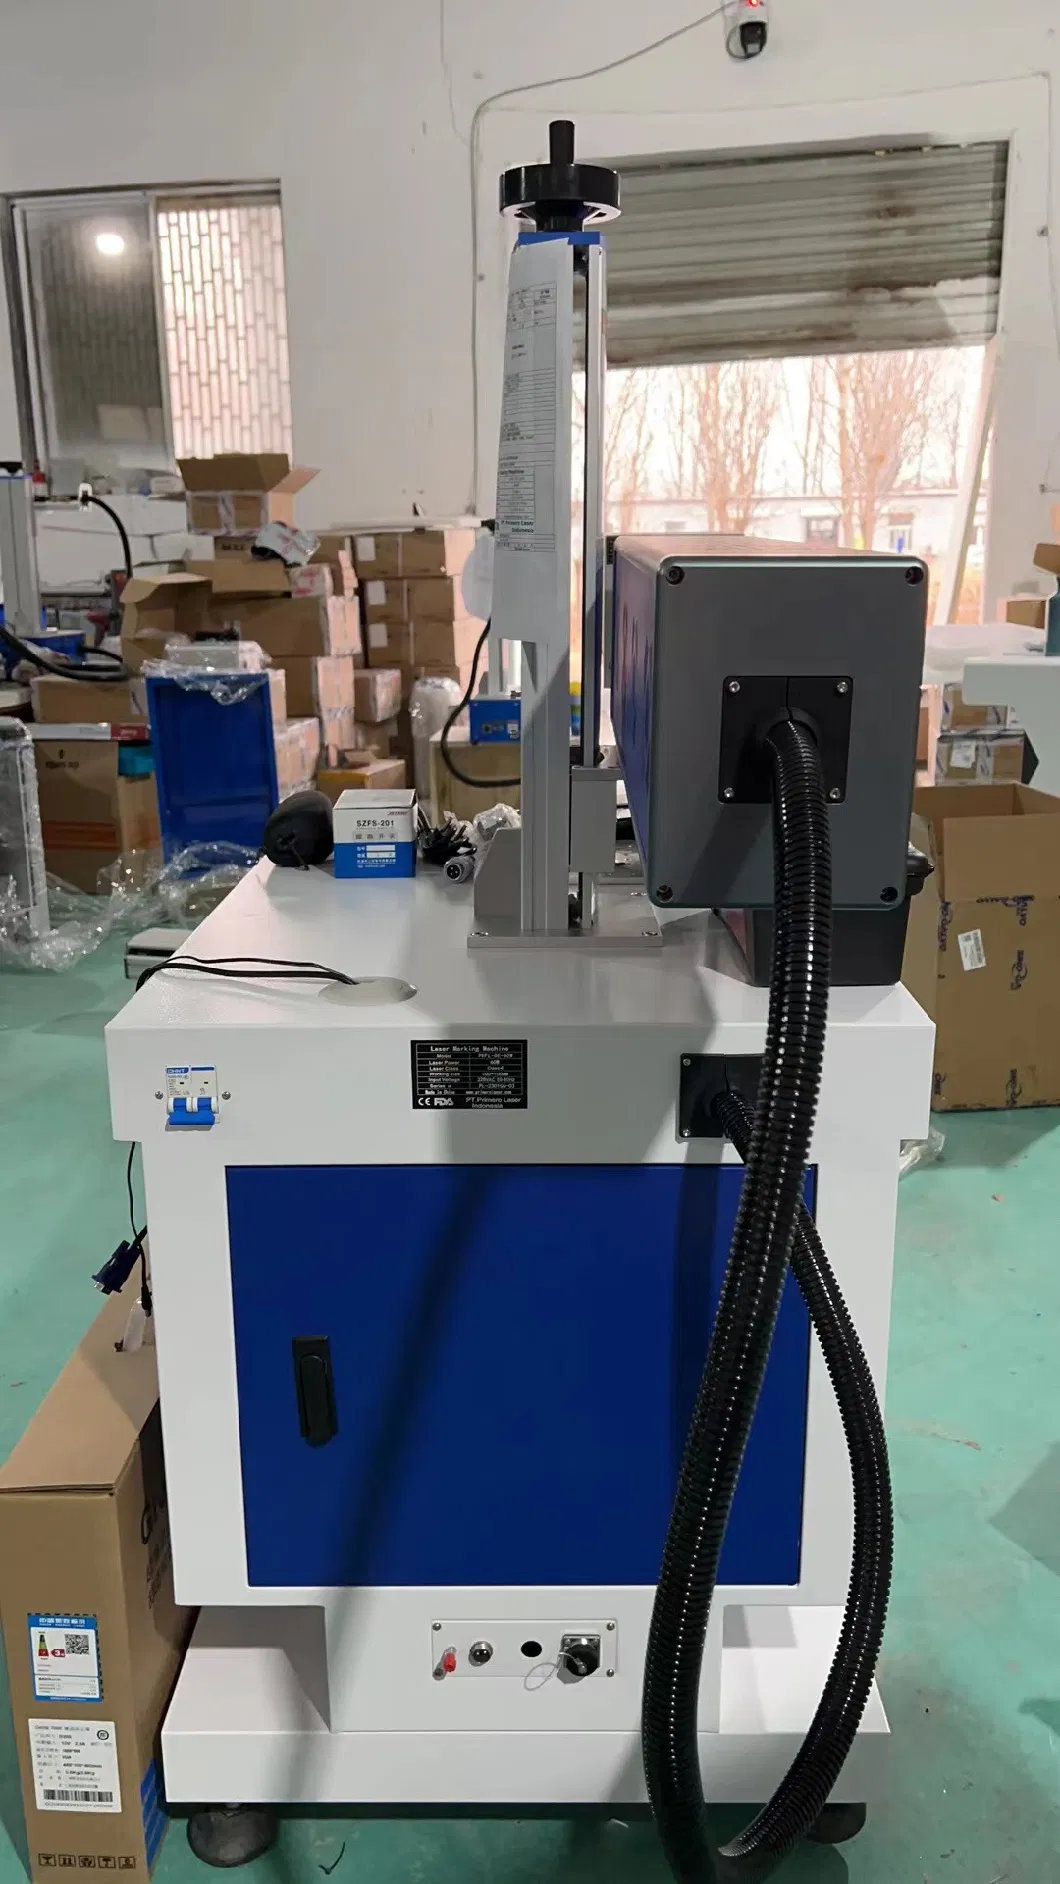 Wood and Leather Marking with Bost Laser Source 30W 40W 60W 100W Nanjing Crd, Nanjing Bost 60W Optical Split Design CO2 Laser Marking Machine